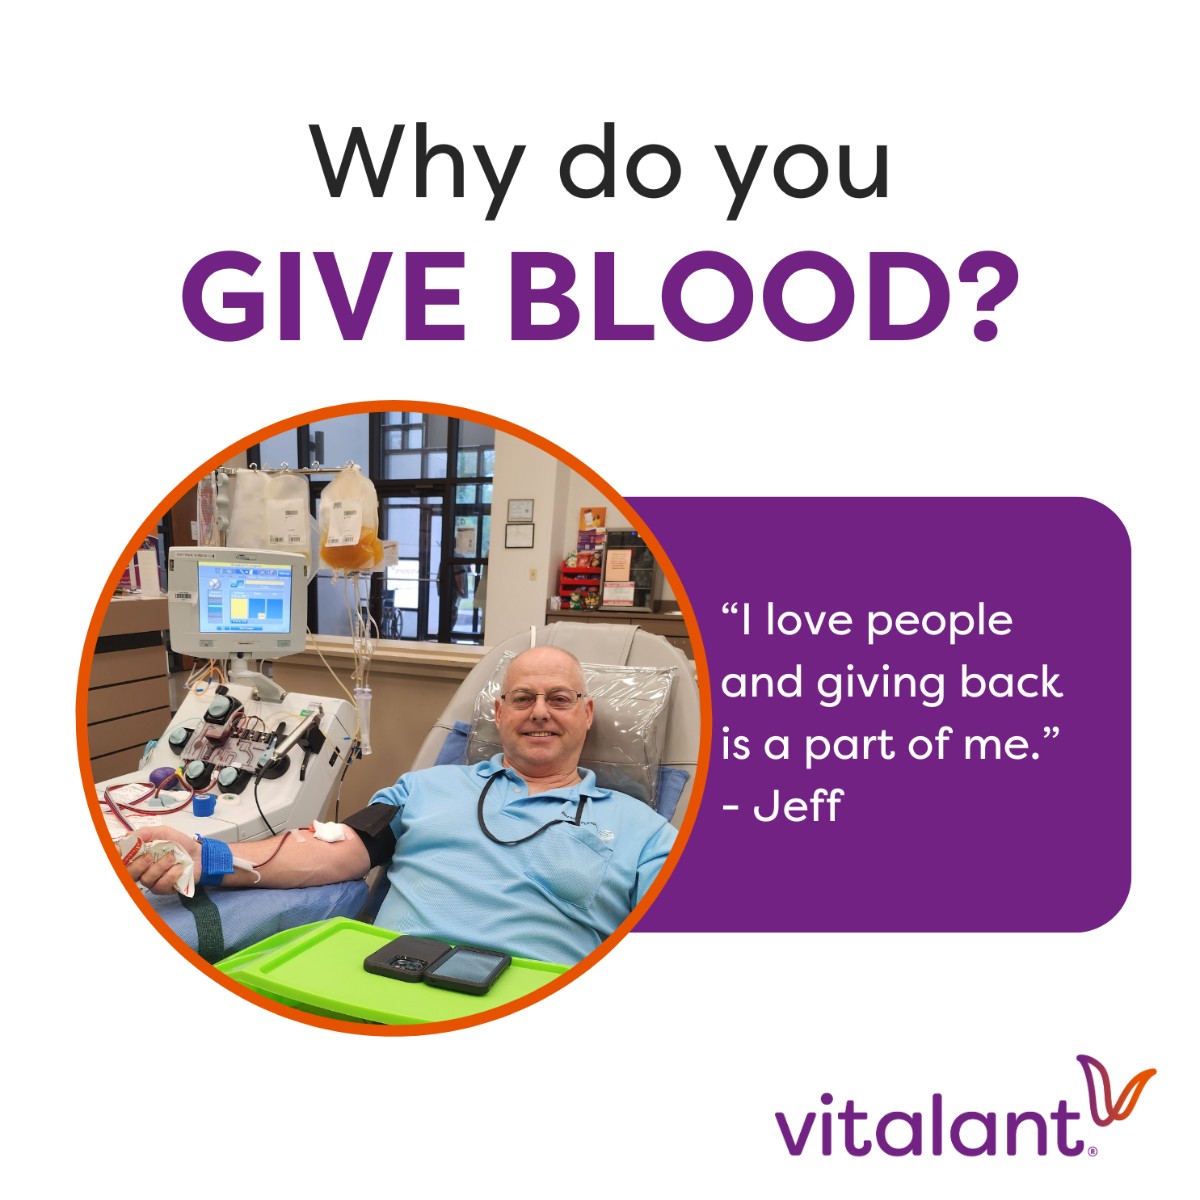 Why do you give blood?
For nearly 28 years, Jeff has been a dedicated blood donor, driven by a desire to serve others. Join donors like Jeff and make a commitment to become a dedicated blood donor and make a vital impact for patients in need. #GiveBlood: brnw.ch/21wJlRx